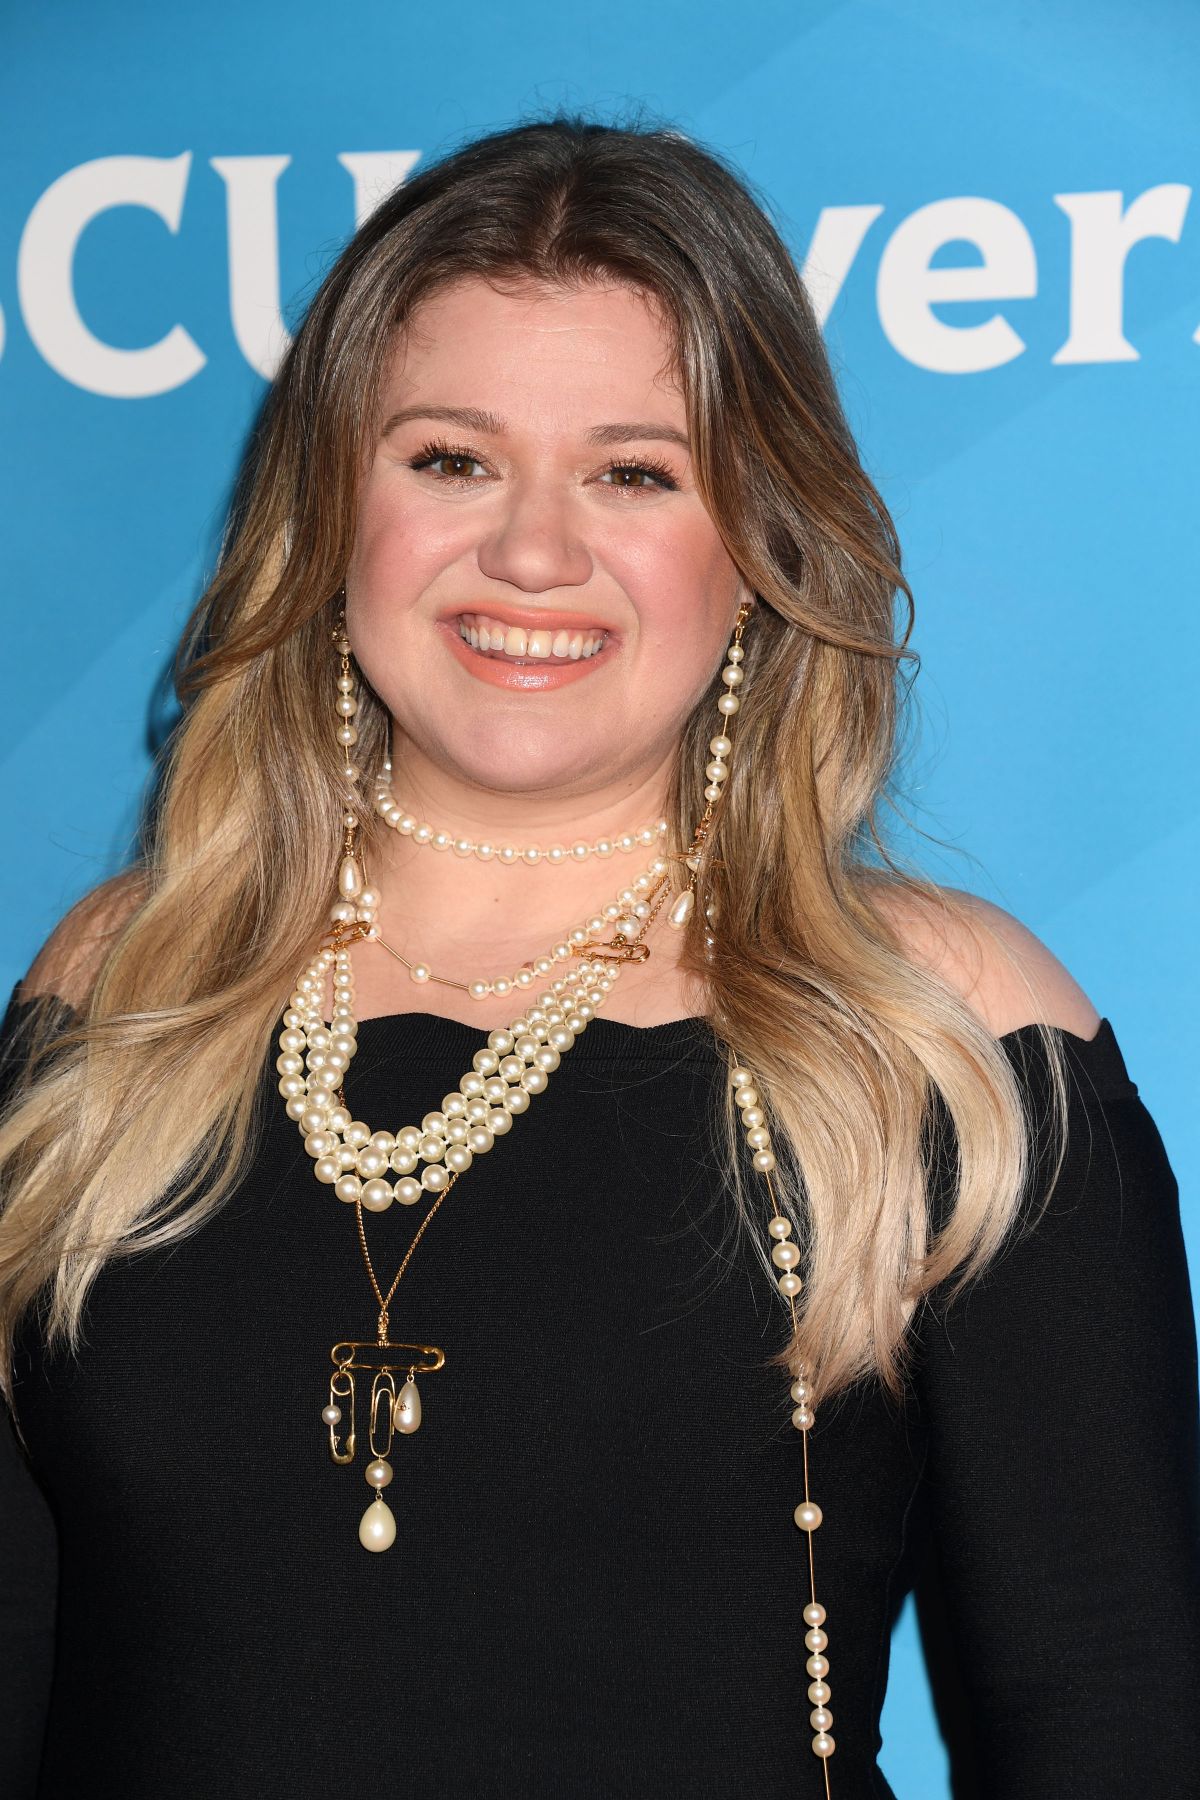 KELLY CLARKSON at NBCUniversal TCA Winter Press Tour in